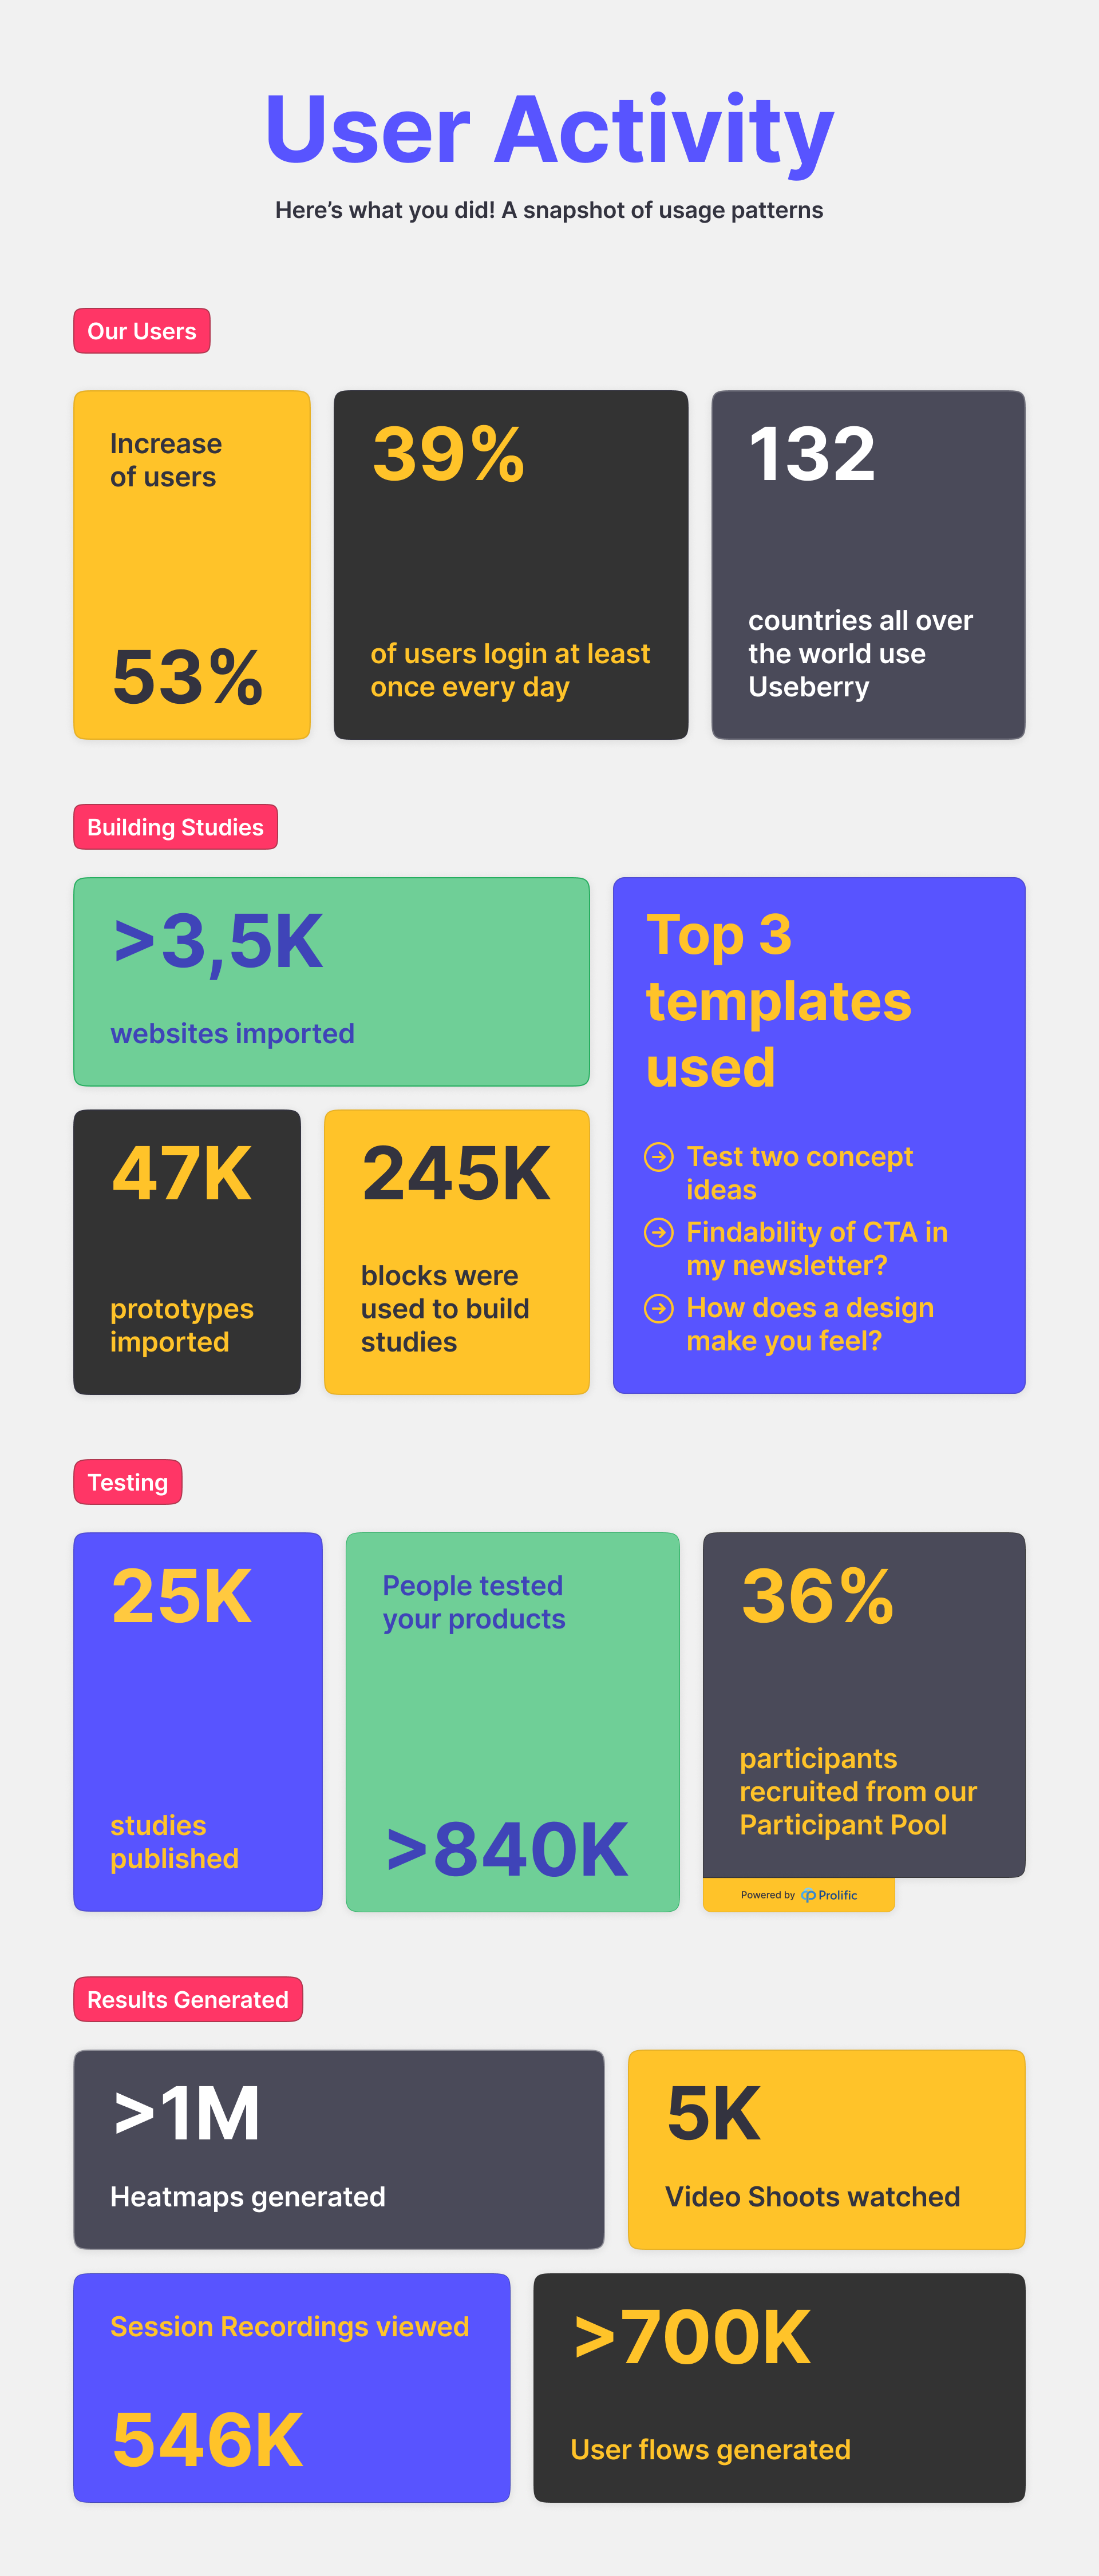 Infographic titled 'User Activity' for Useberry, presenting a snapshot of usage patterns. The 'Our Users' section shows a 53% increase in users, 39% daily login rate, and Useberry's reach in 132 countries. 'Building Studies' highlights over 3,500 websites imported, 47,000 prototypes imported, 245,000 blocks for studies, and the top 3 template uses. 'Testing' reports 25,000 studies published, over 840,000 product tests by users, and 36% recruitment from the participant pool. 'Results Generated' reveals over 1 million heatmaps, 546,000 session recordings viewed, and over 700,000 user flows generated. The color-coded blocks with key statistics offer a visual summary of user engagement and platform growth